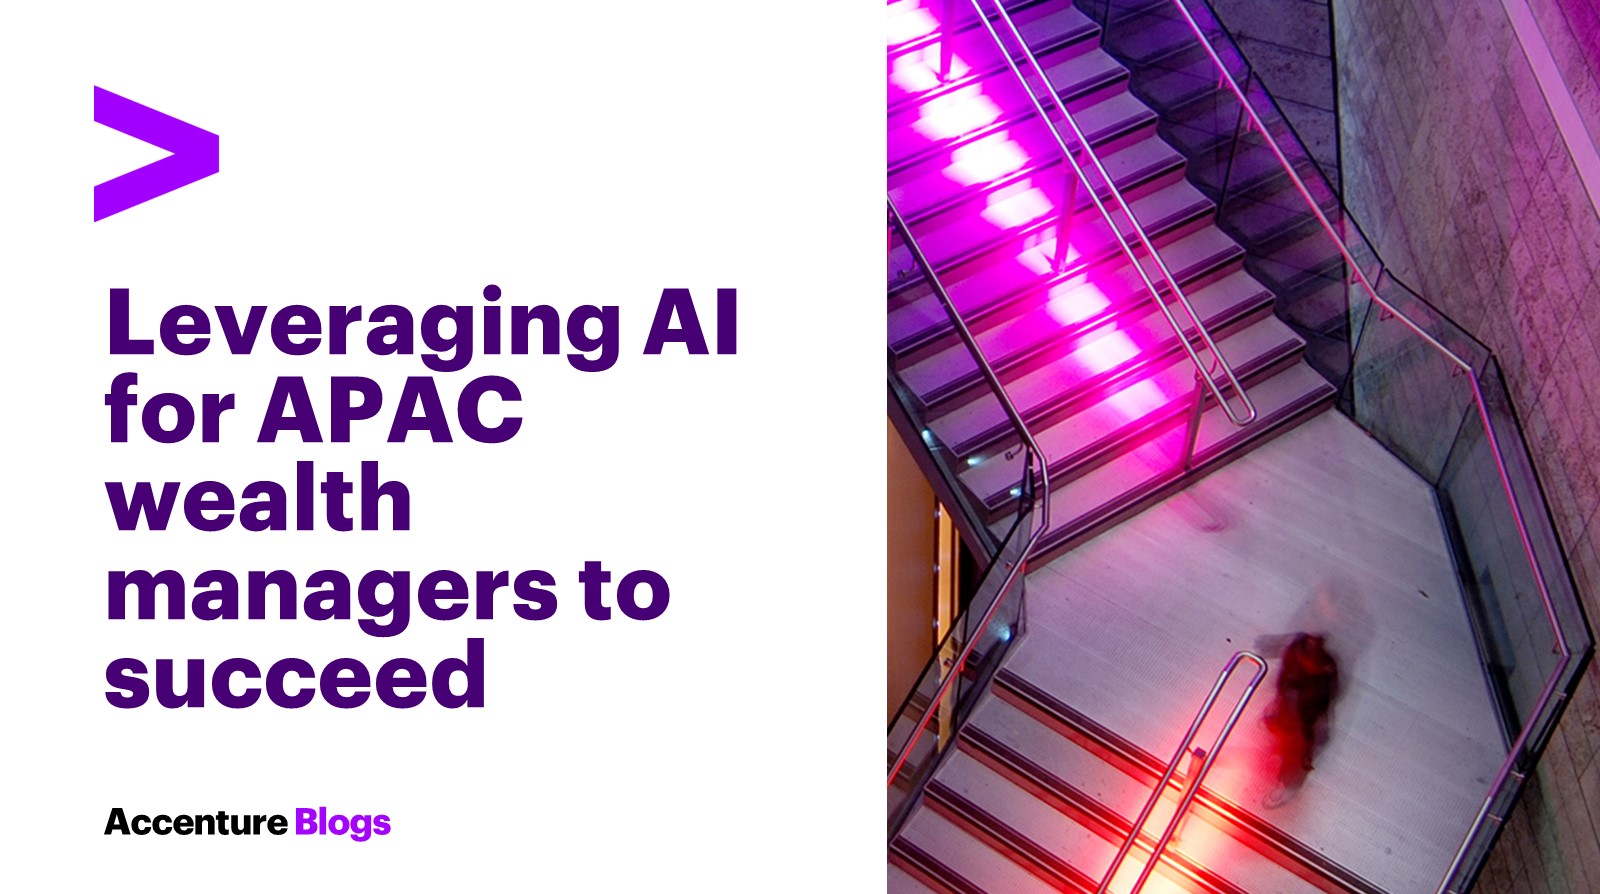 Accenture Leveraging AI for APAC wealth managers to succeed